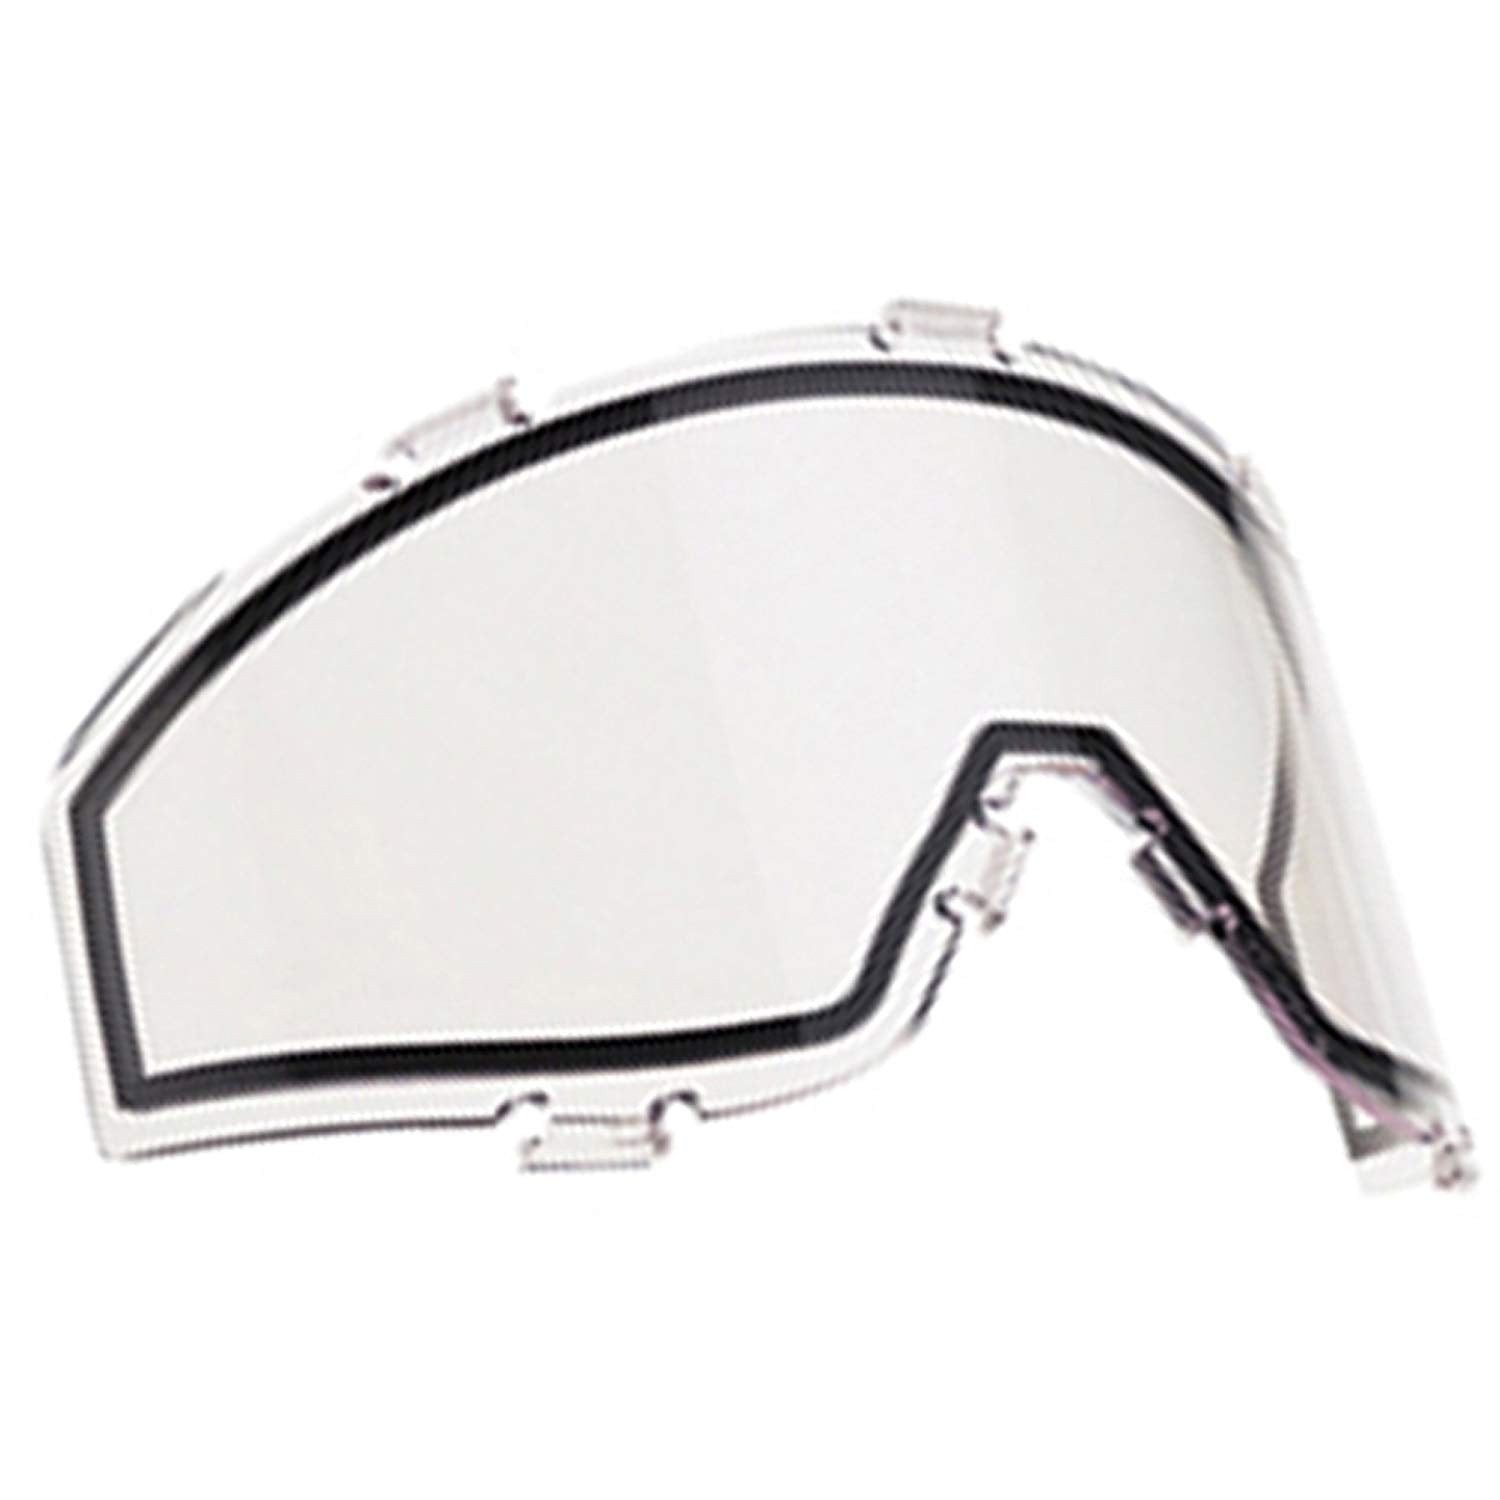 JT Spectra Goggle Lens - Thermal –